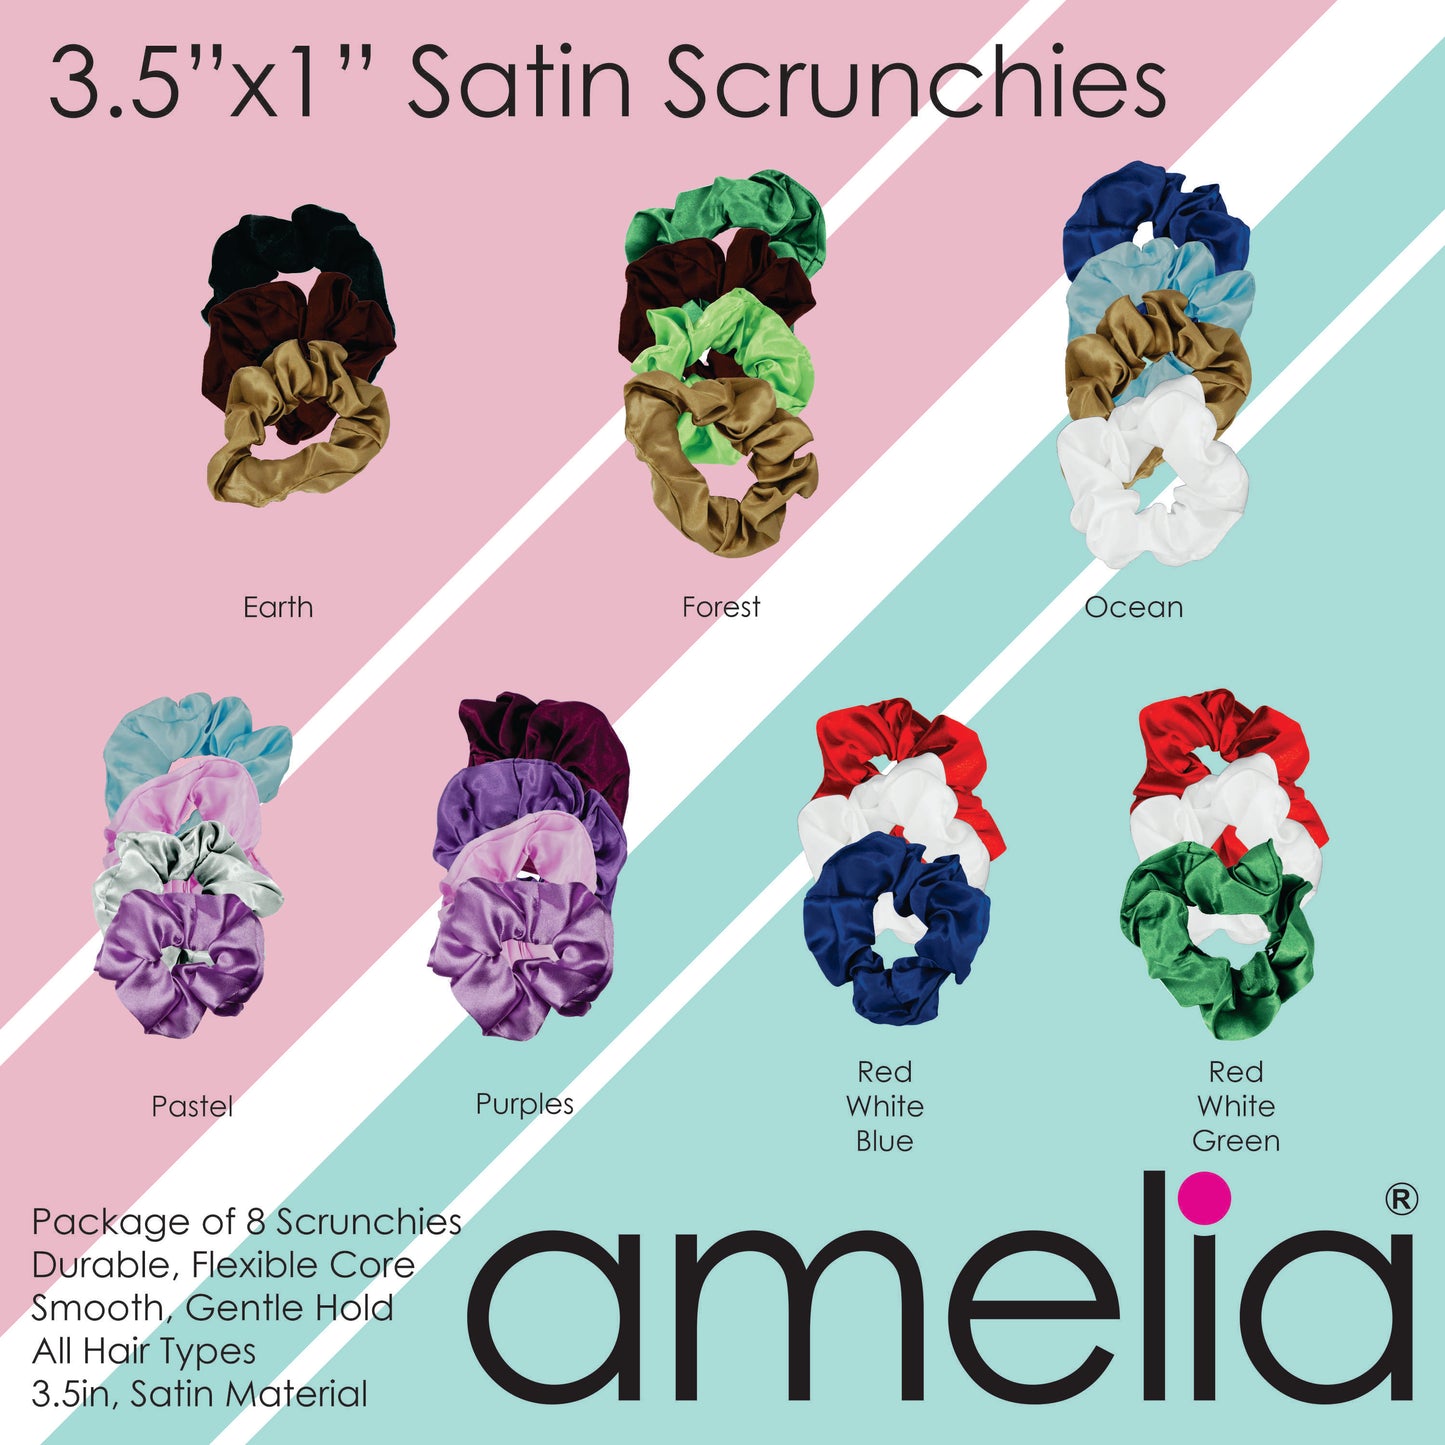 Amelia Beauty Pastel Blue Imitation Silk Scrunchies, 4.5in Diameter, Gentle on Hair, Strong Hold, No Snag, No Dents or Creases. 6 Pack